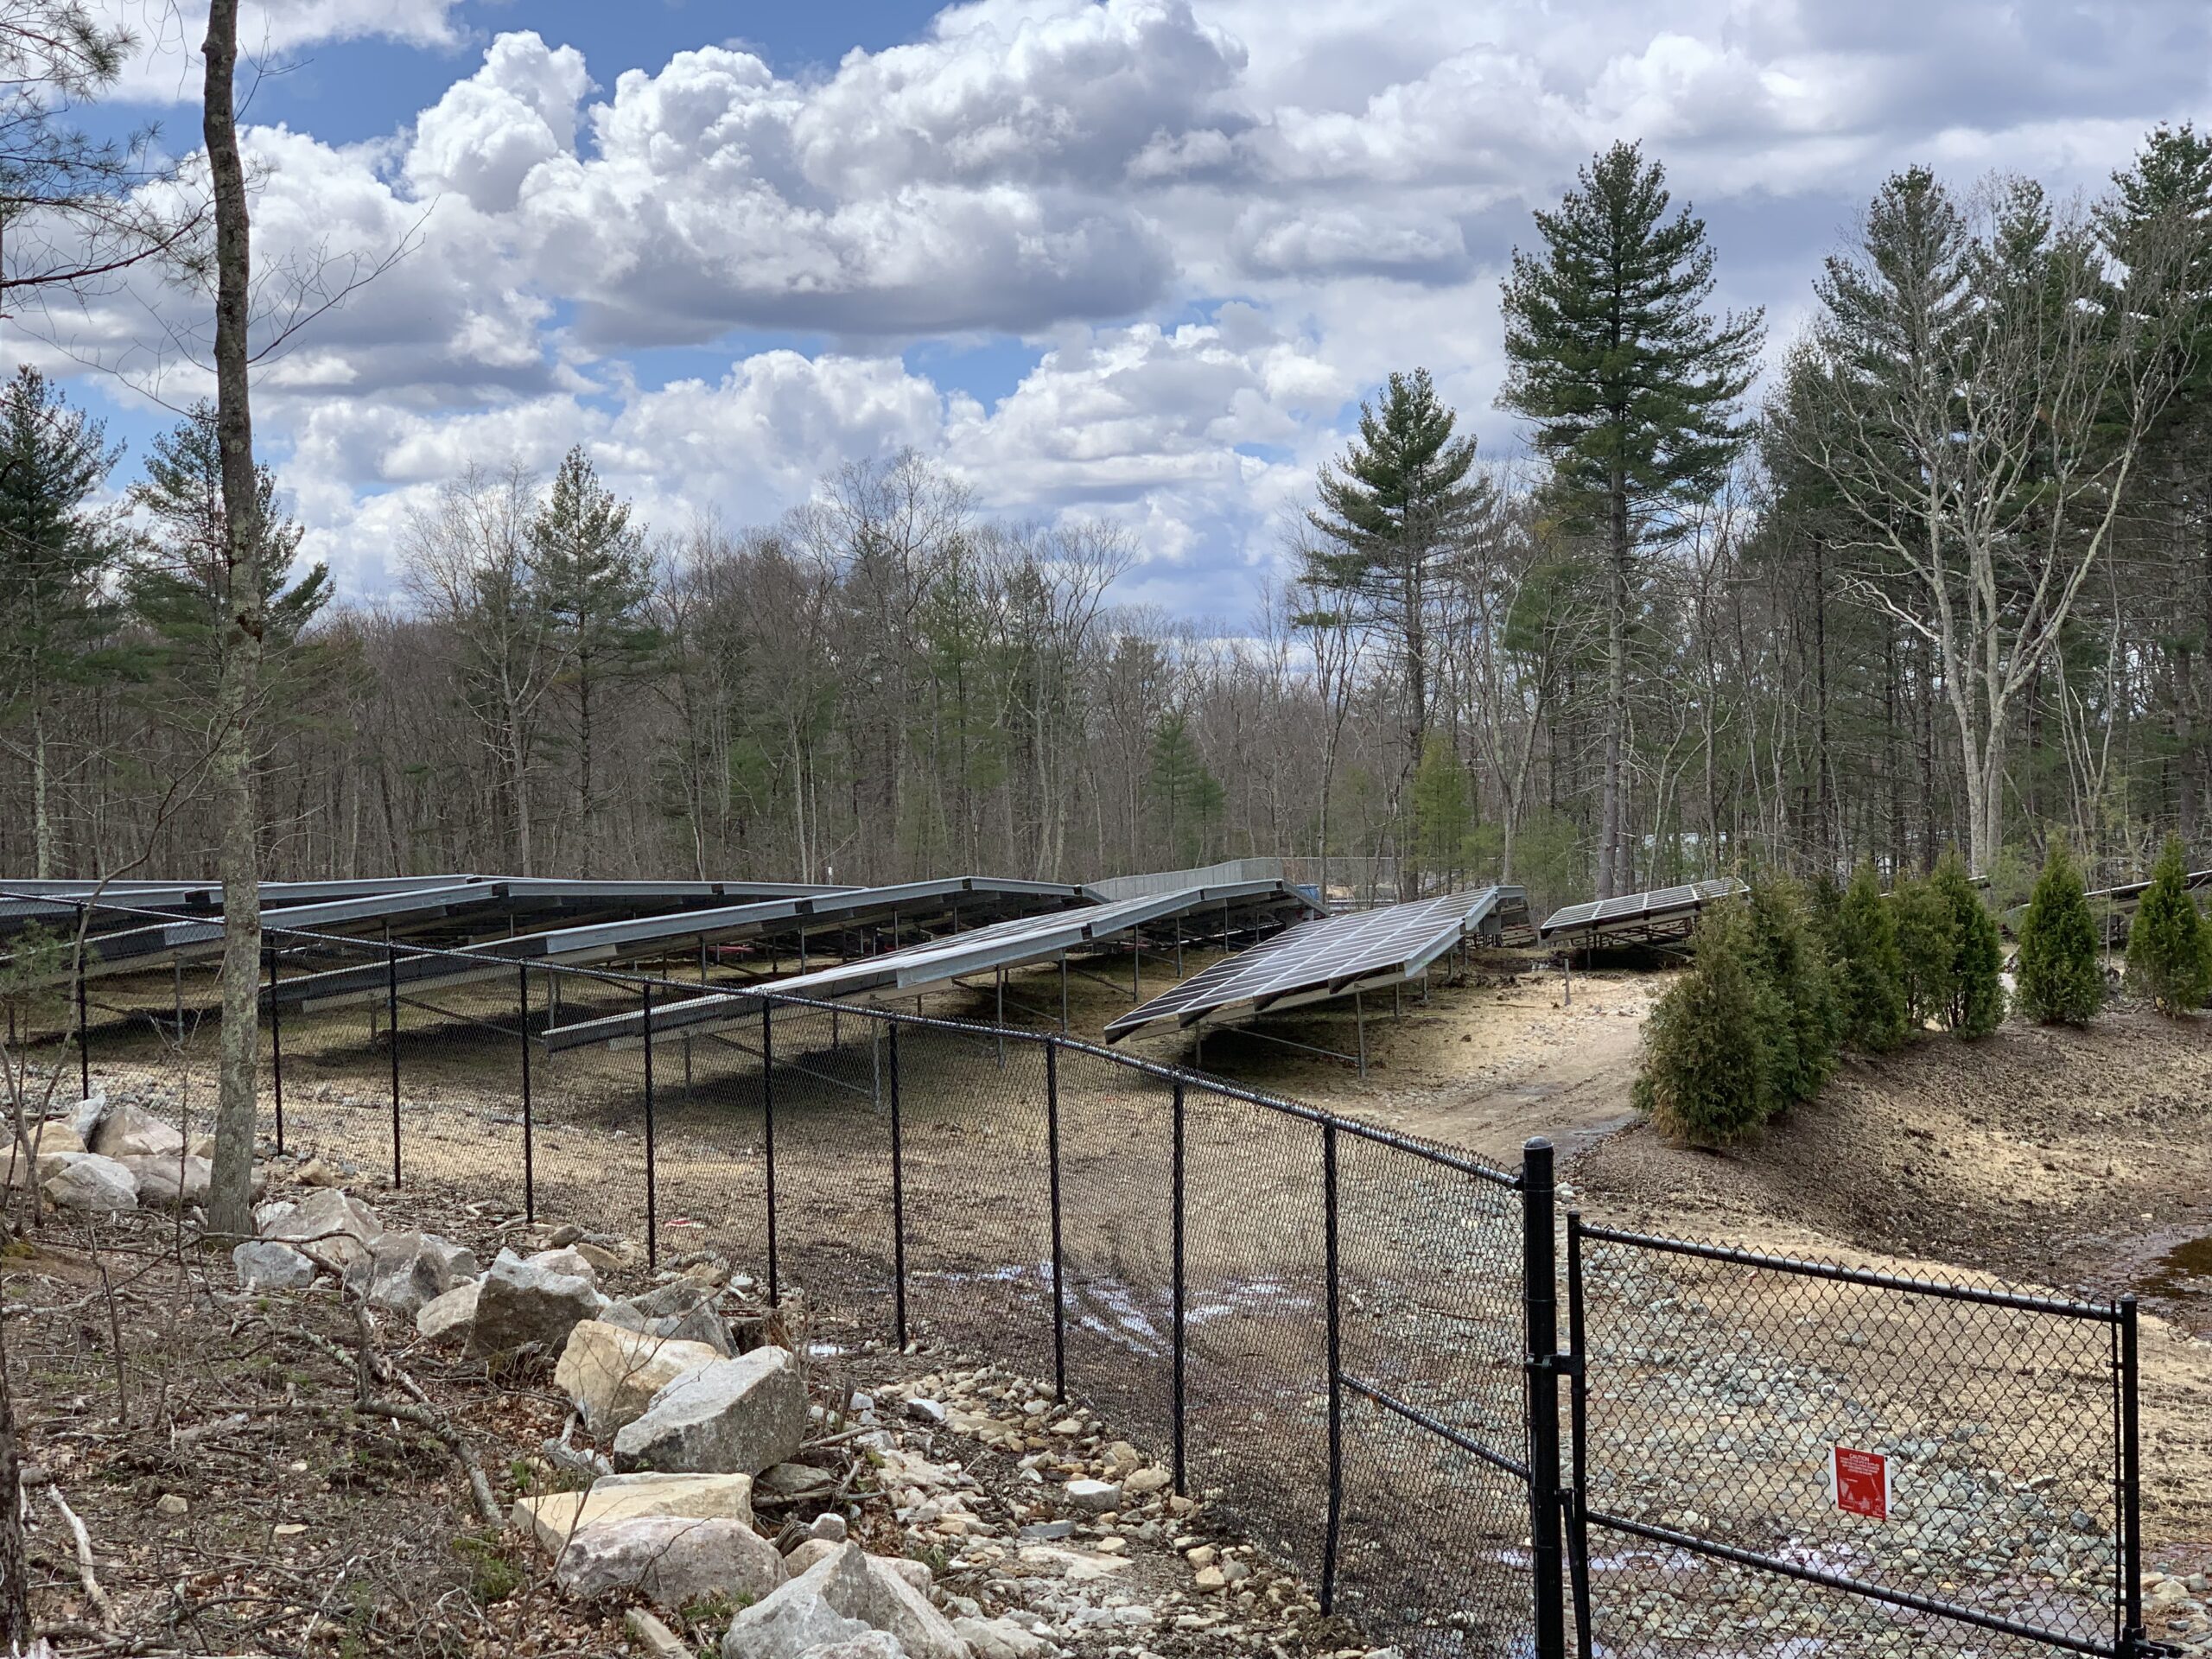 Conservation Commission roundup: Grasshopper solar array request gets negative feedback; fined Leonard Street developer threatens to reopen lawsuit against town